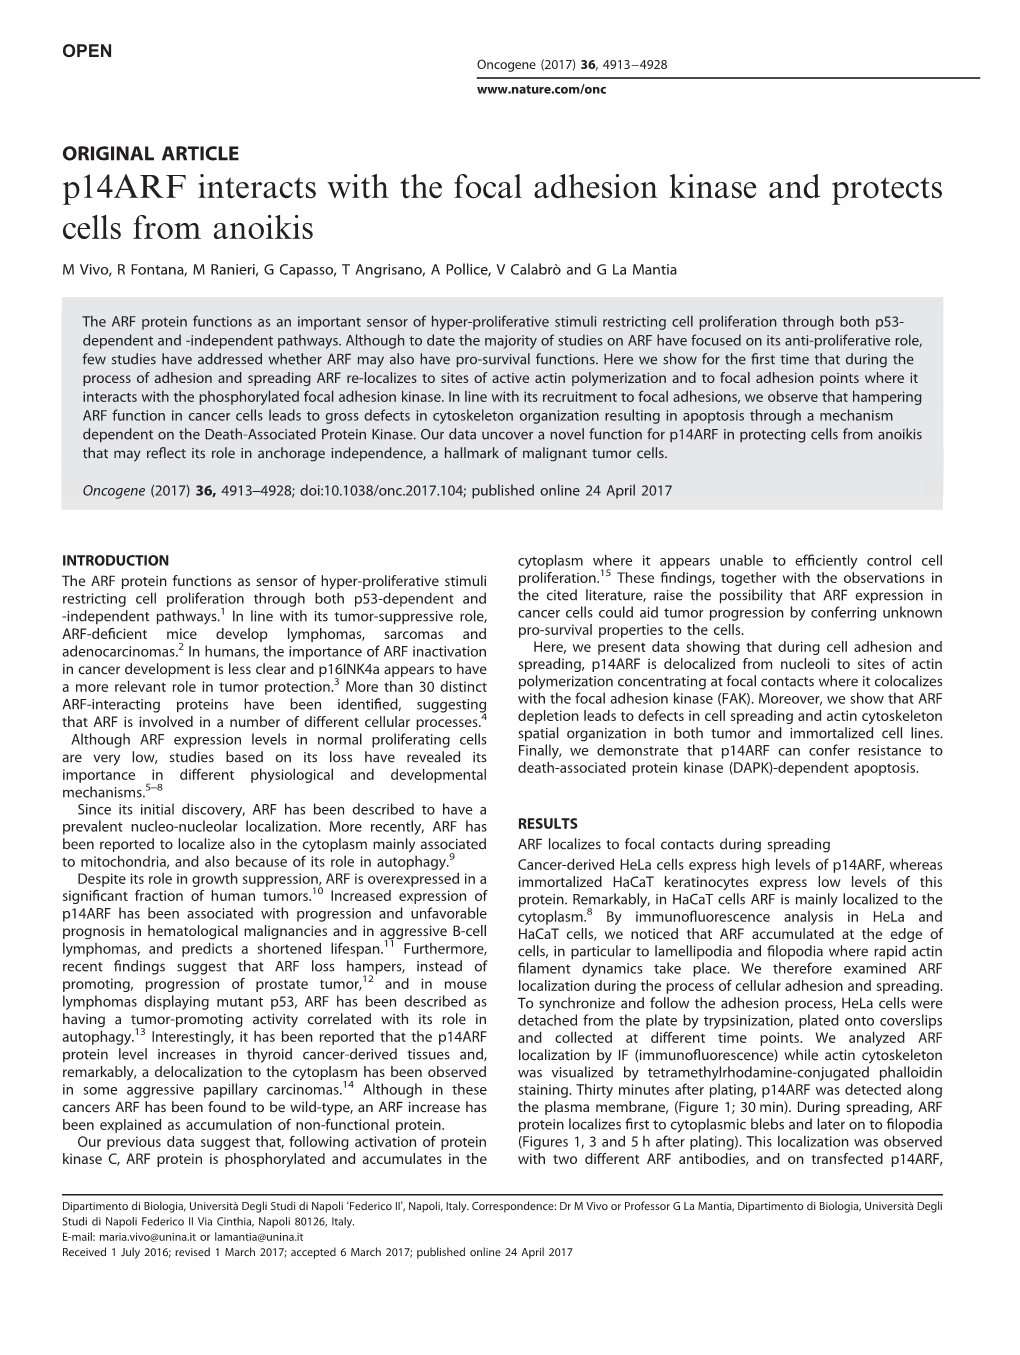 P14arf Interacts with the Focal Adhesion Kinase and Protects Cells from Anoikis